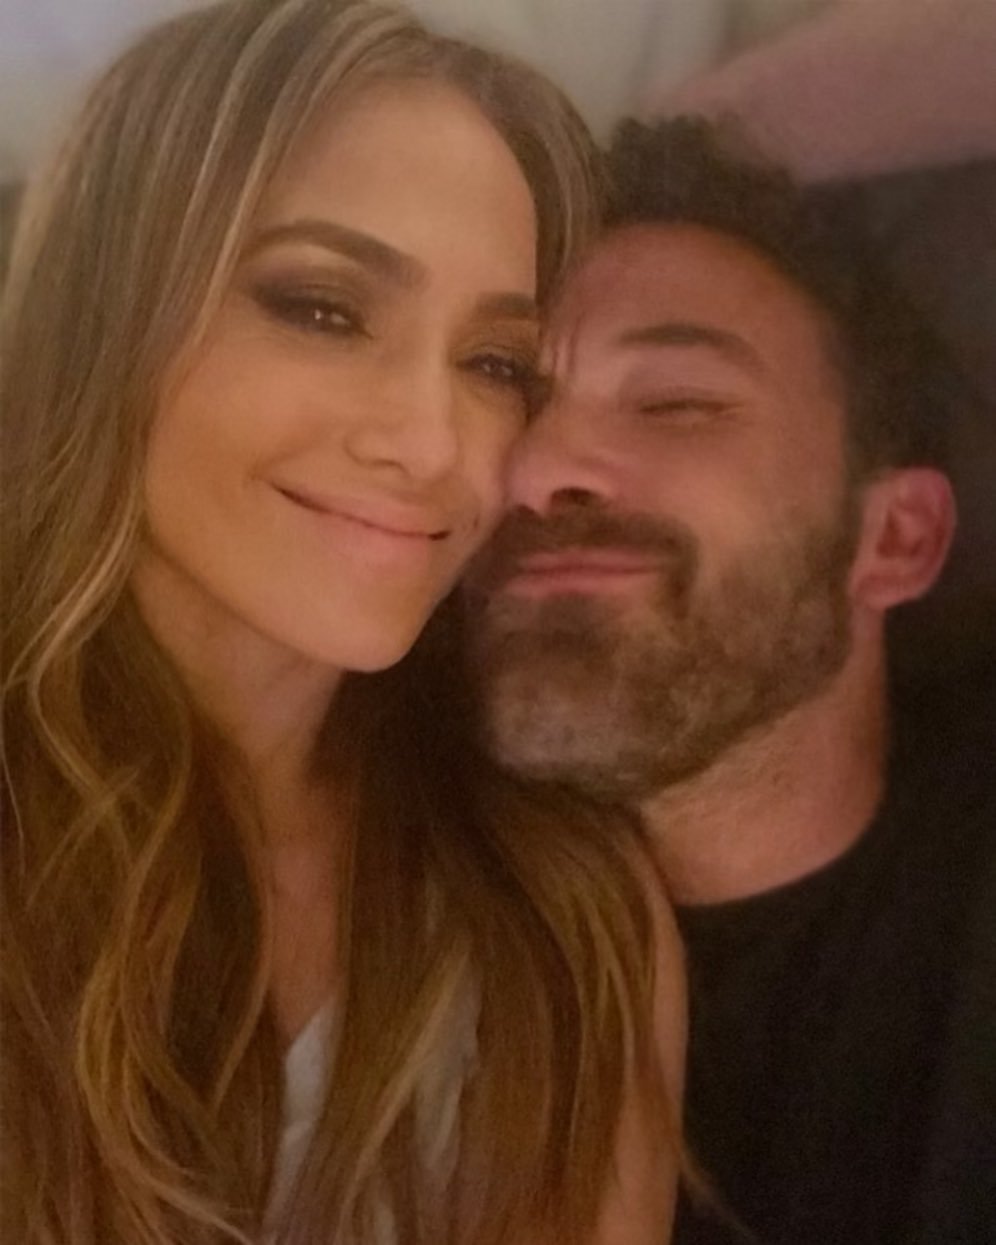 J.Lo's this week celebrated her 1-year wedding anniversary with Ben Affleck.